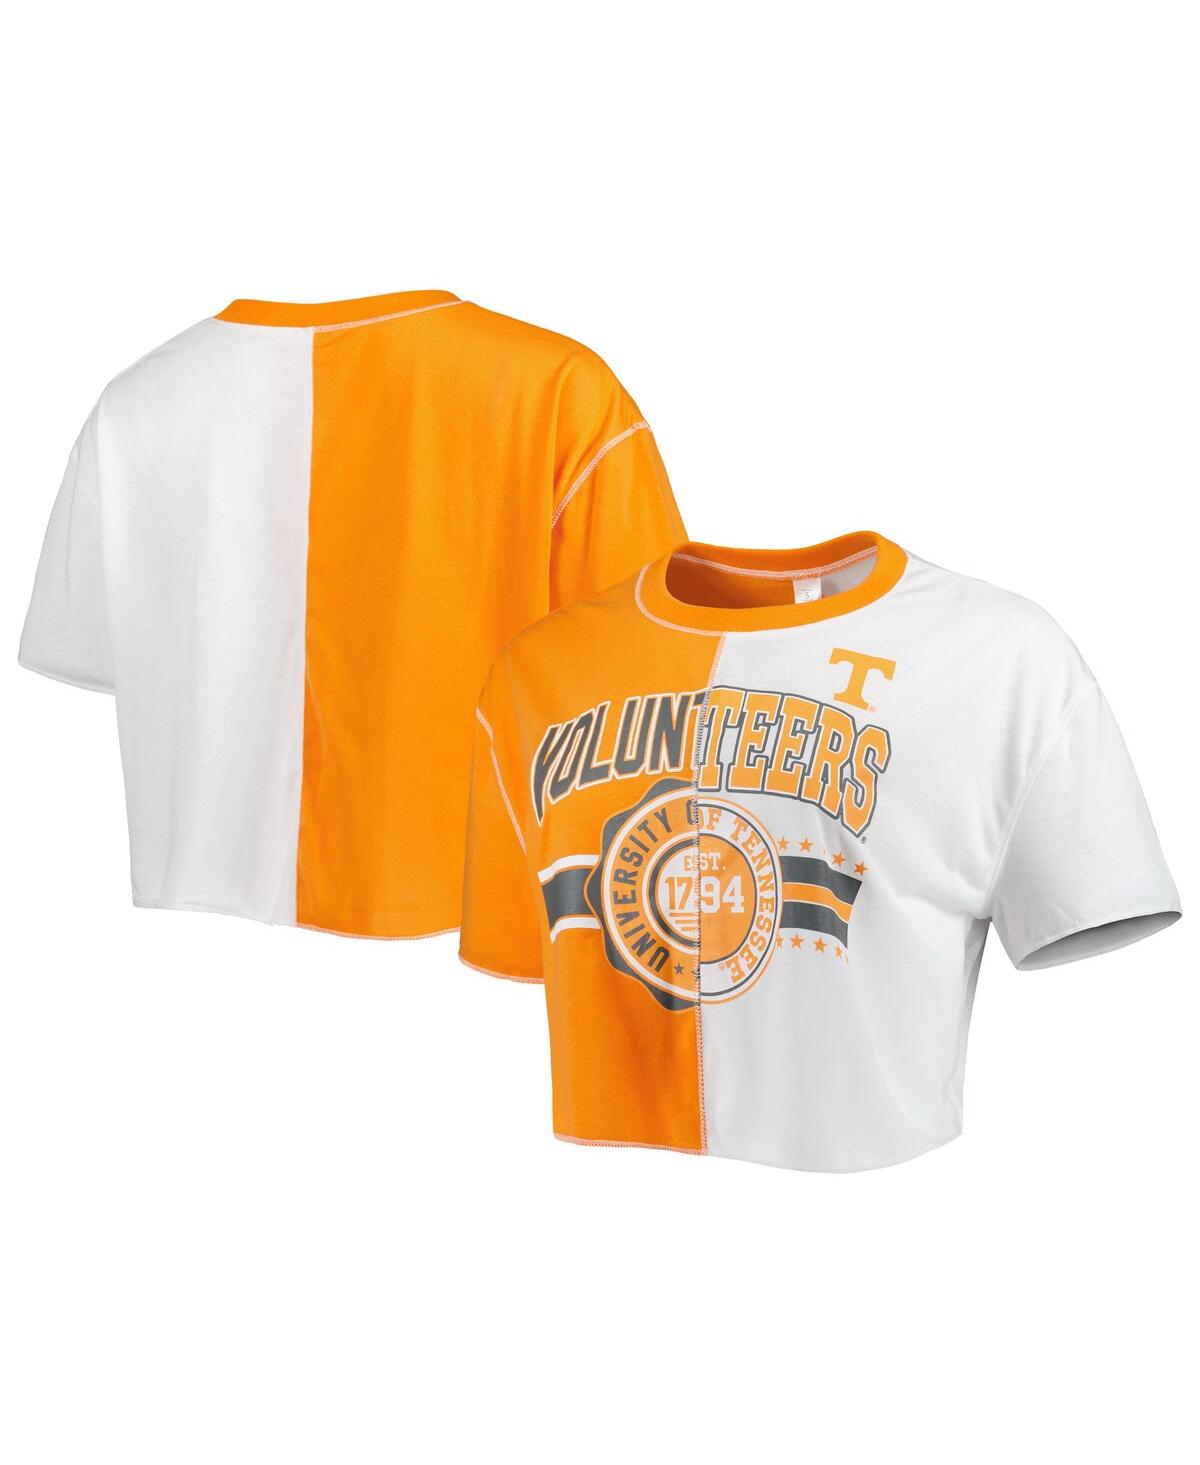 Women's Tennessee Orange/White Tennessee Volunteers Colorblock Cropped T-Shirt - Tennessee Orange